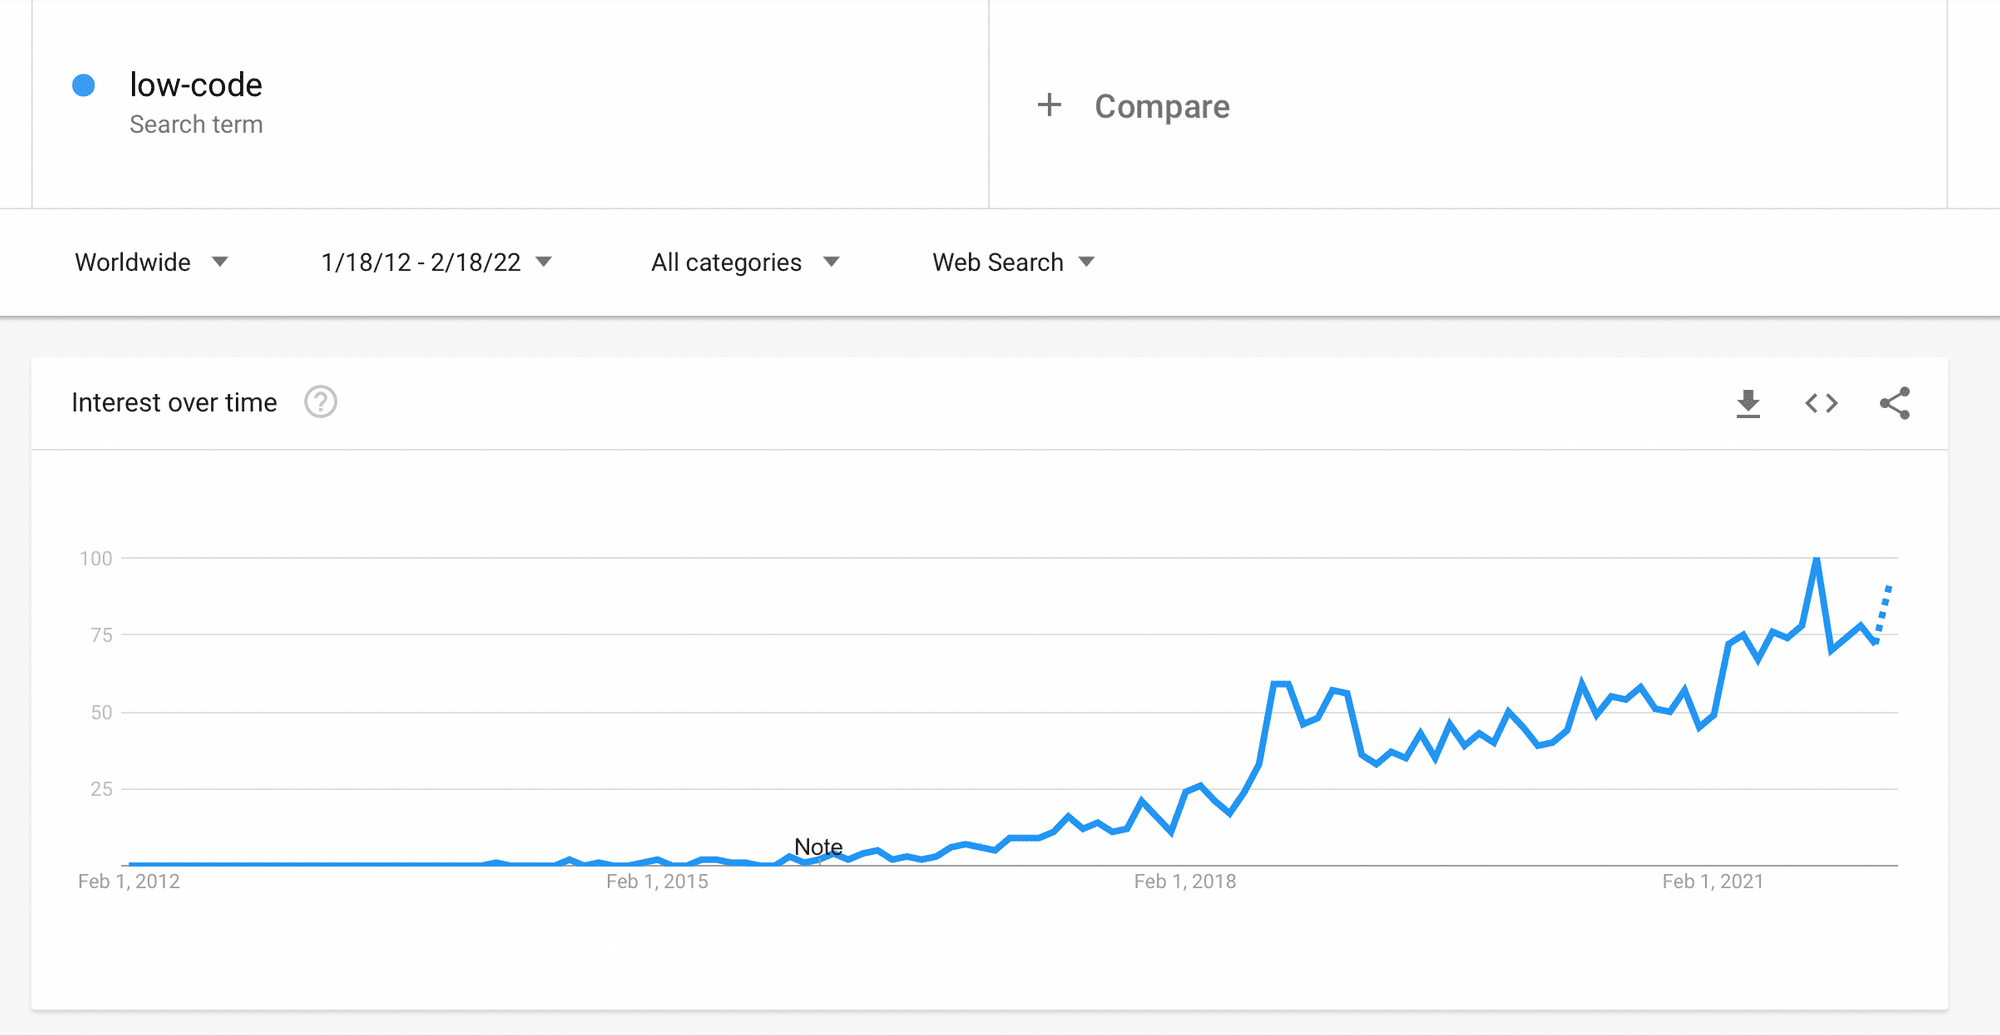 Interest in 'low-code' over the past 10 years graph